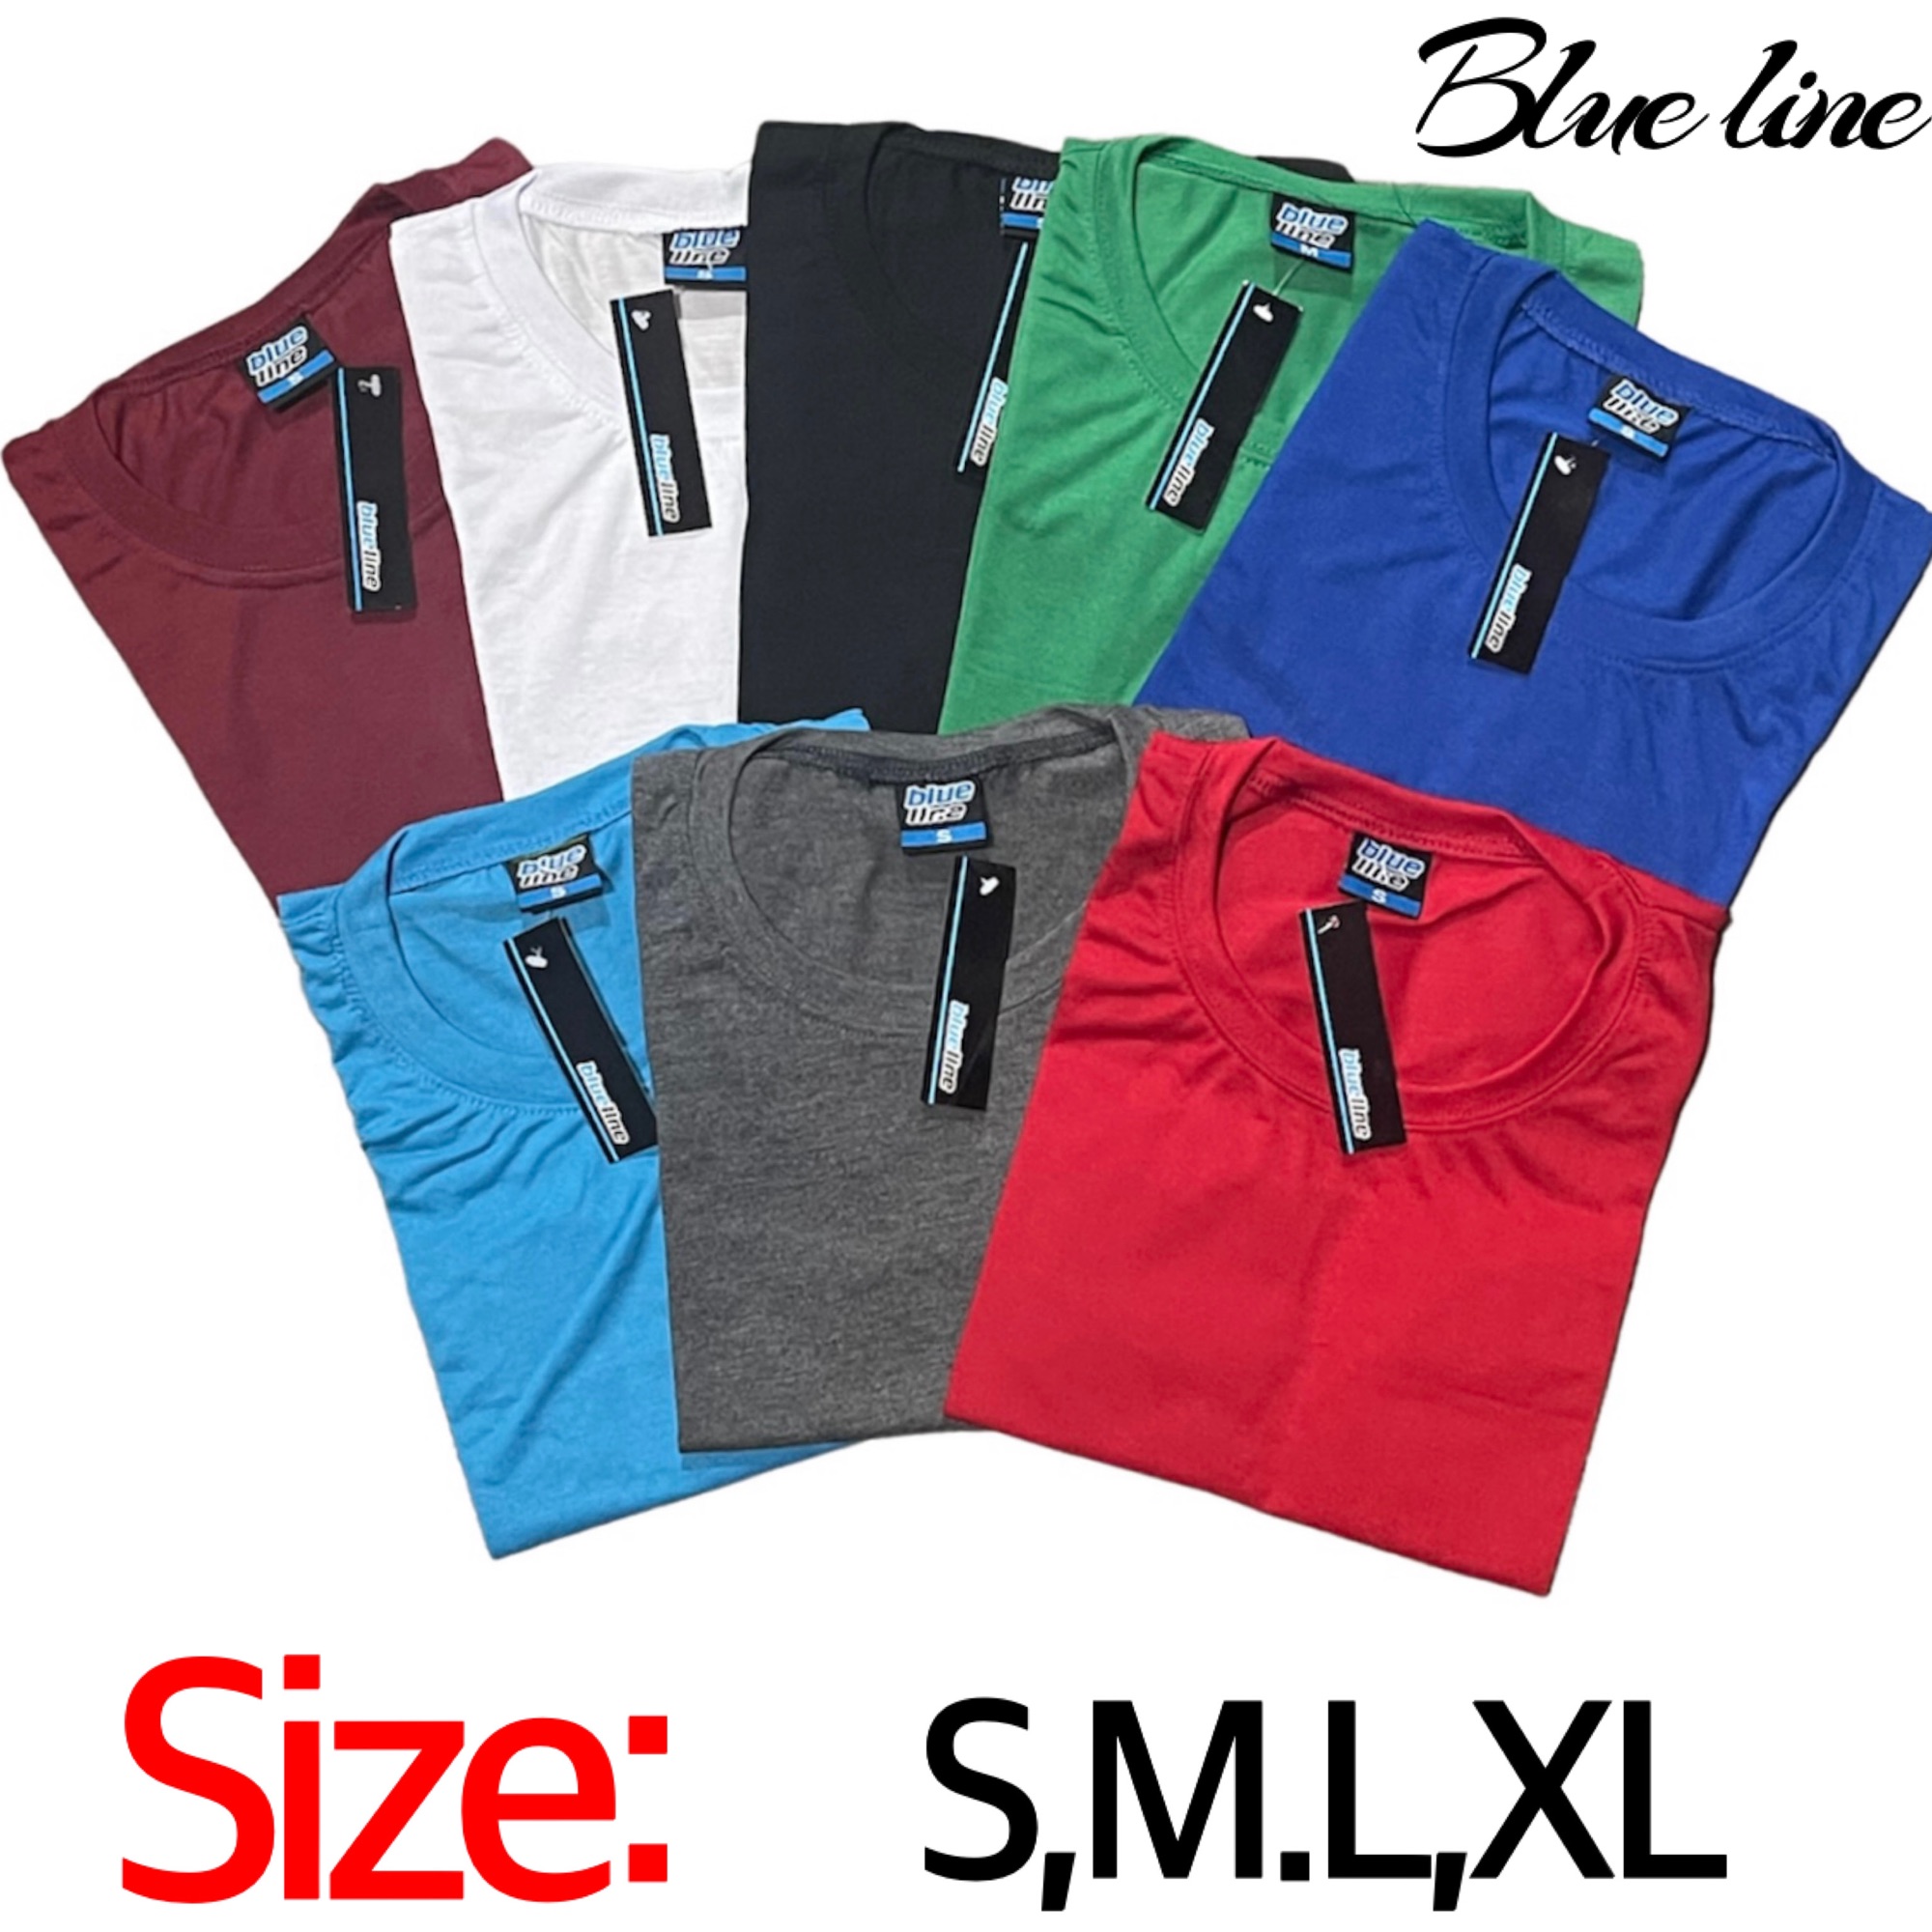 "High-quality Unisex Cotton T-Shirt in Various Sizes"